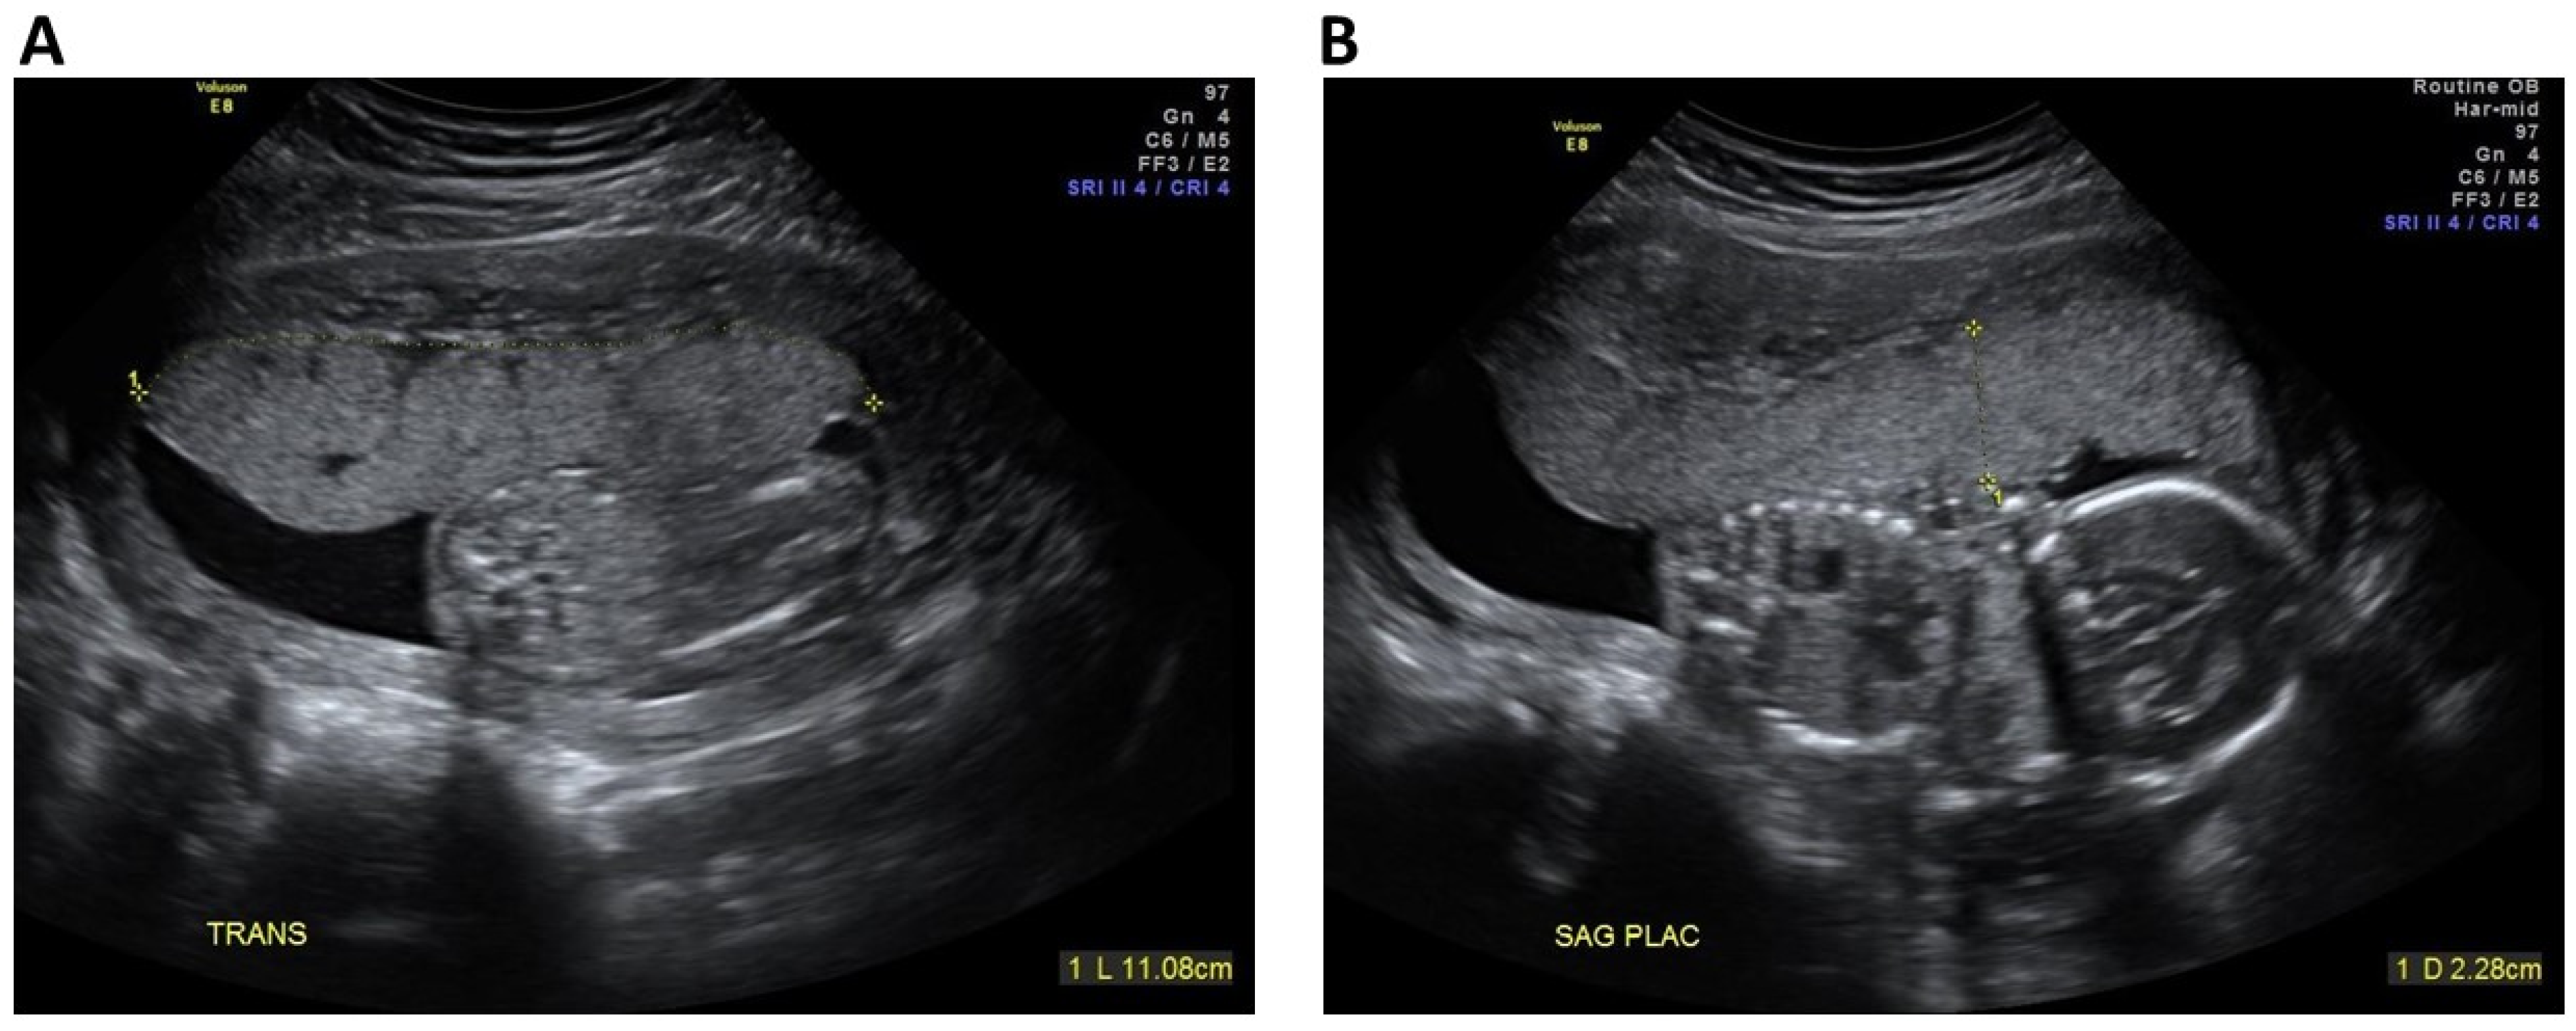 abnormal placenta ultrasound images